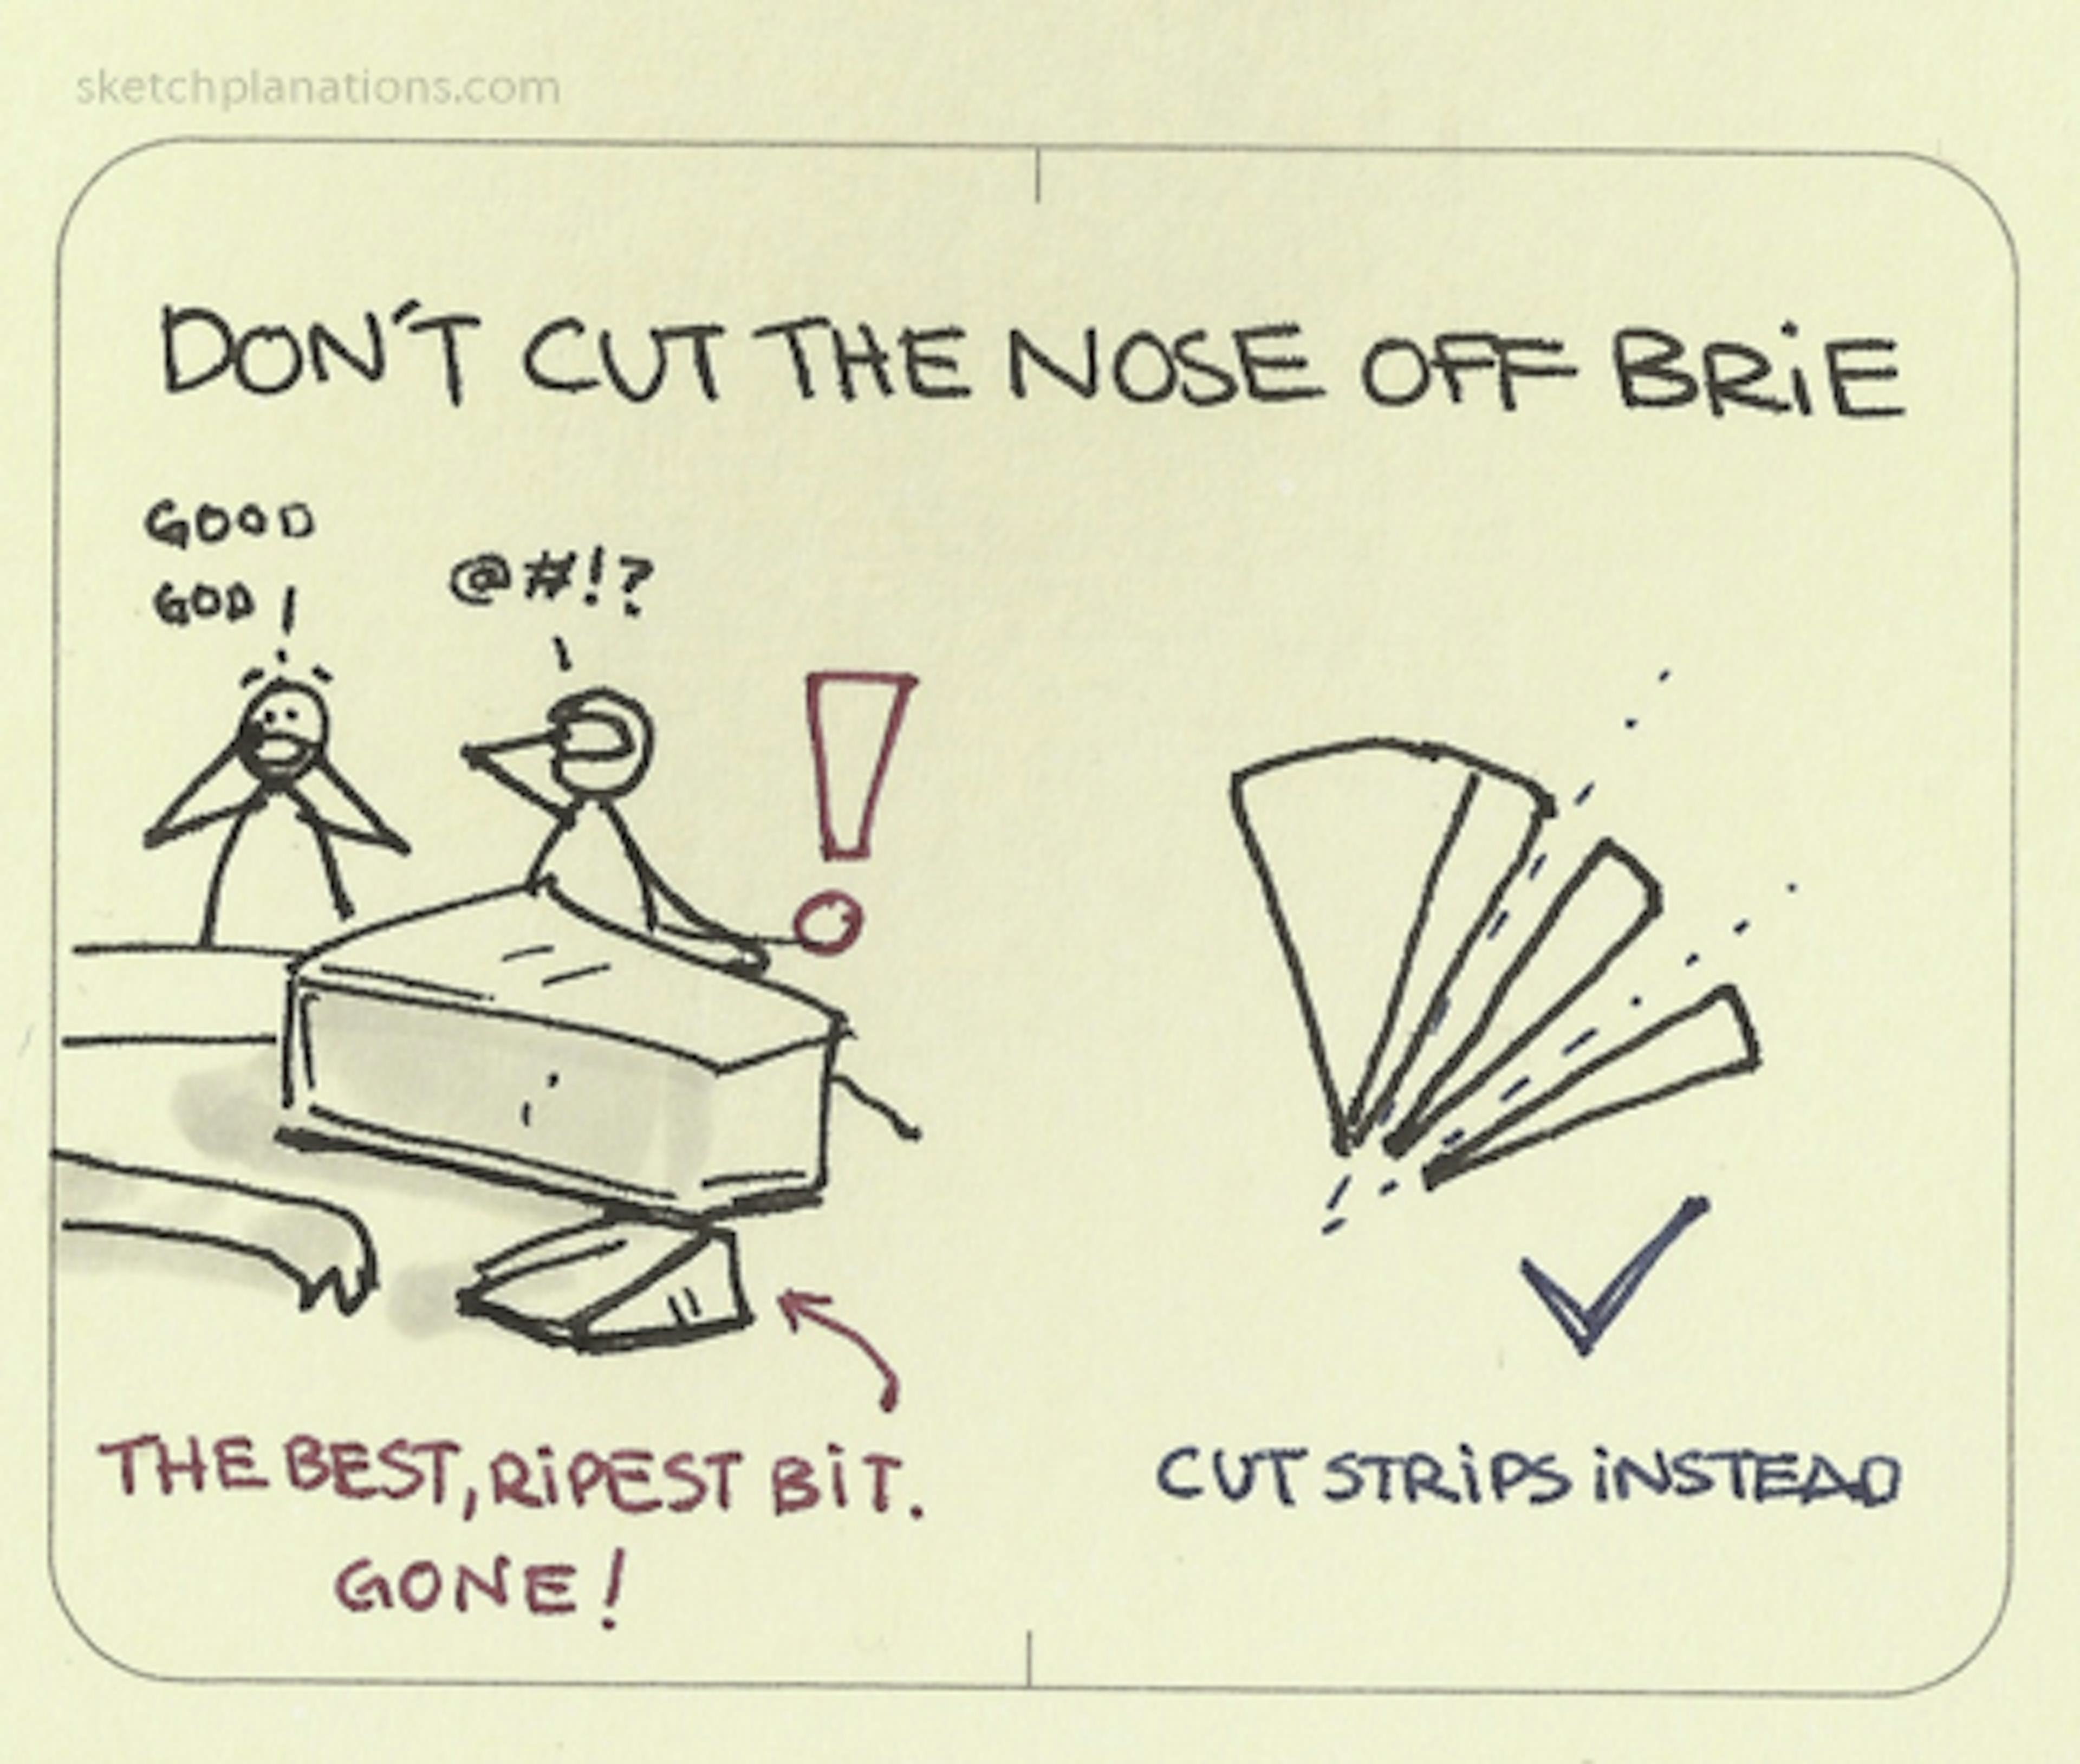 Don’t cut the nose off brie - Sketchplanations